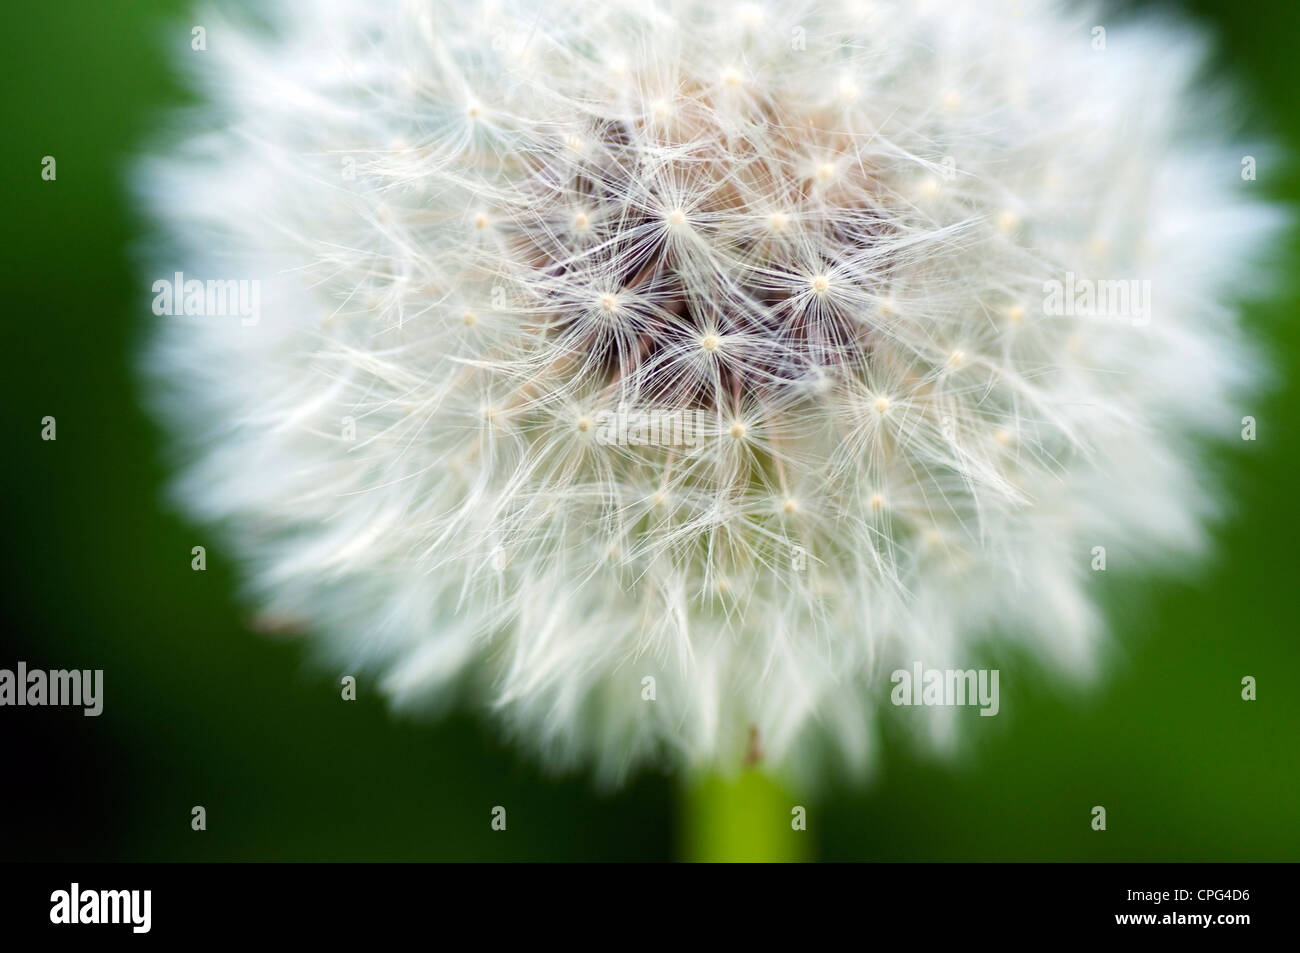 Dandelion with ripe seeds, a 'blowball' Stock Photo